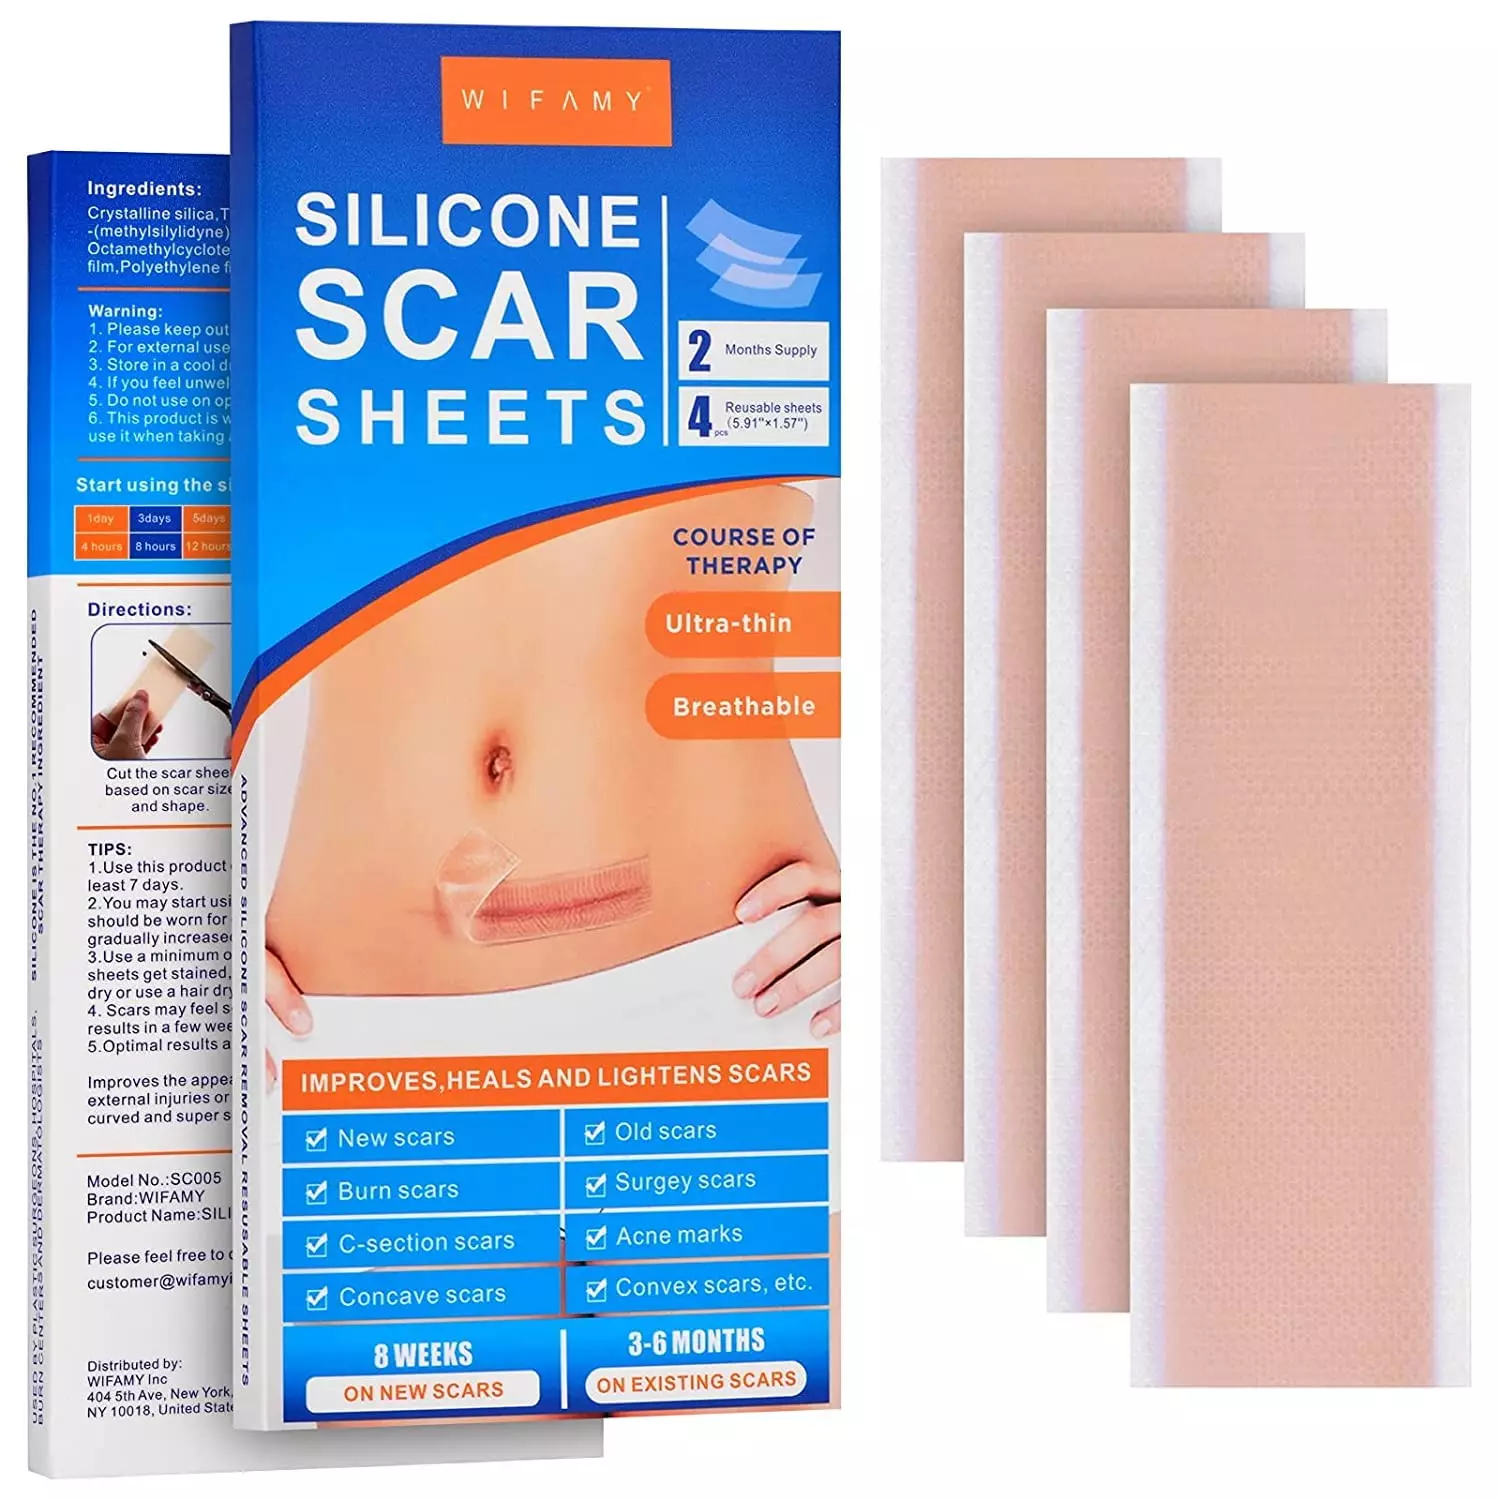 Wifamy Silicone Scar Sheets